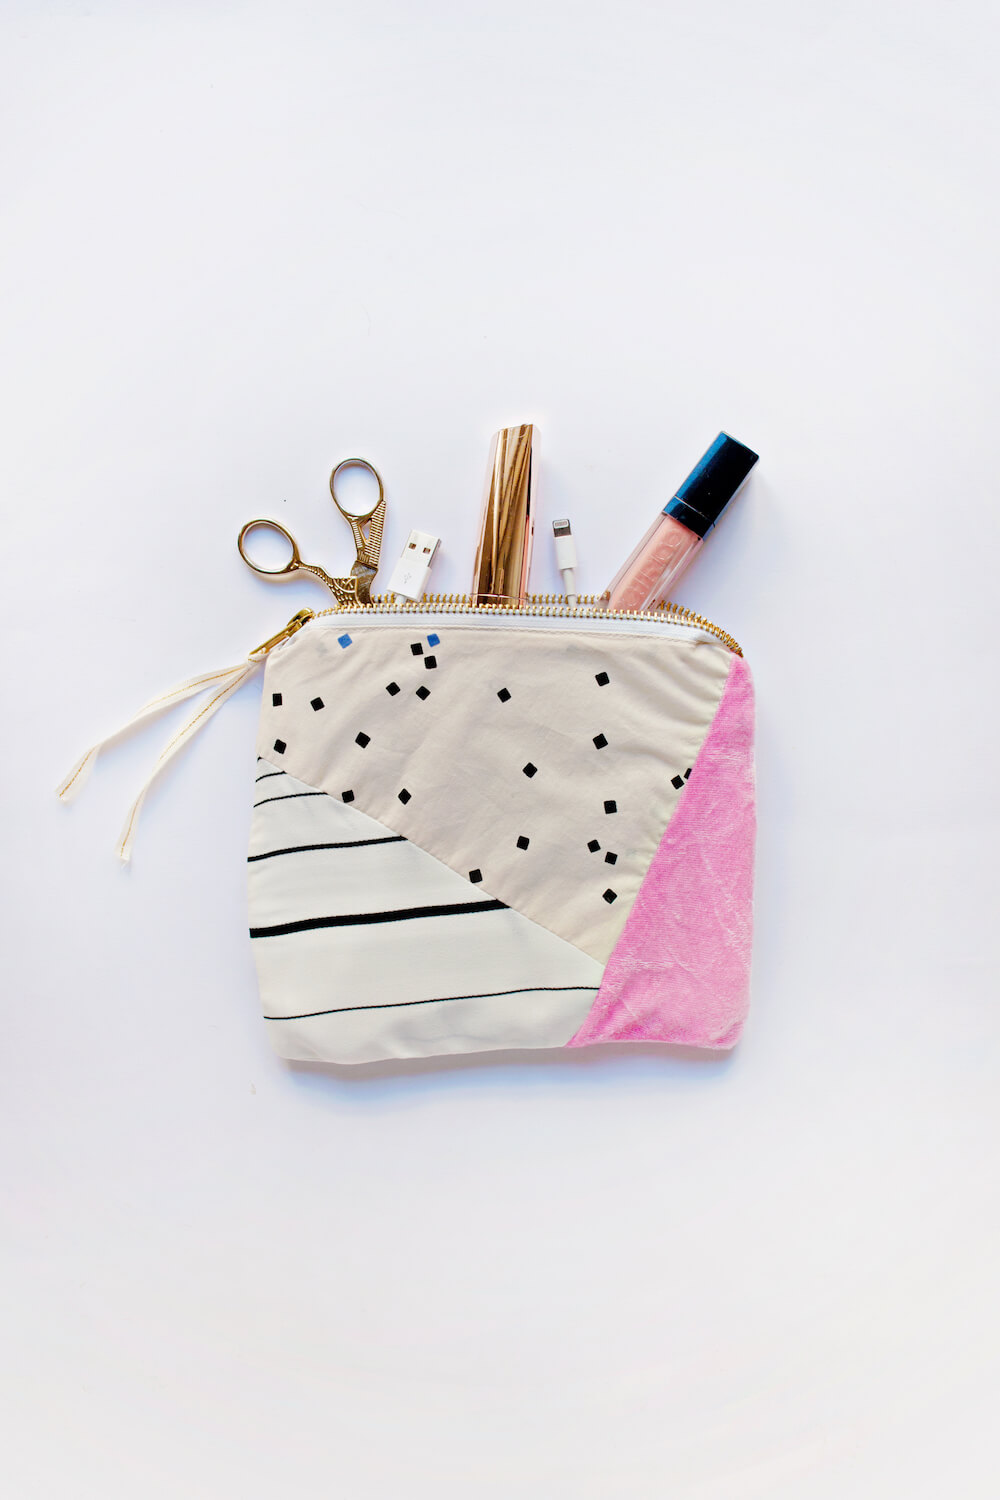 Cute Little Makeup Fabric  Zipper Pouch DIY : Fabric Craft Ideas To Make And Sell